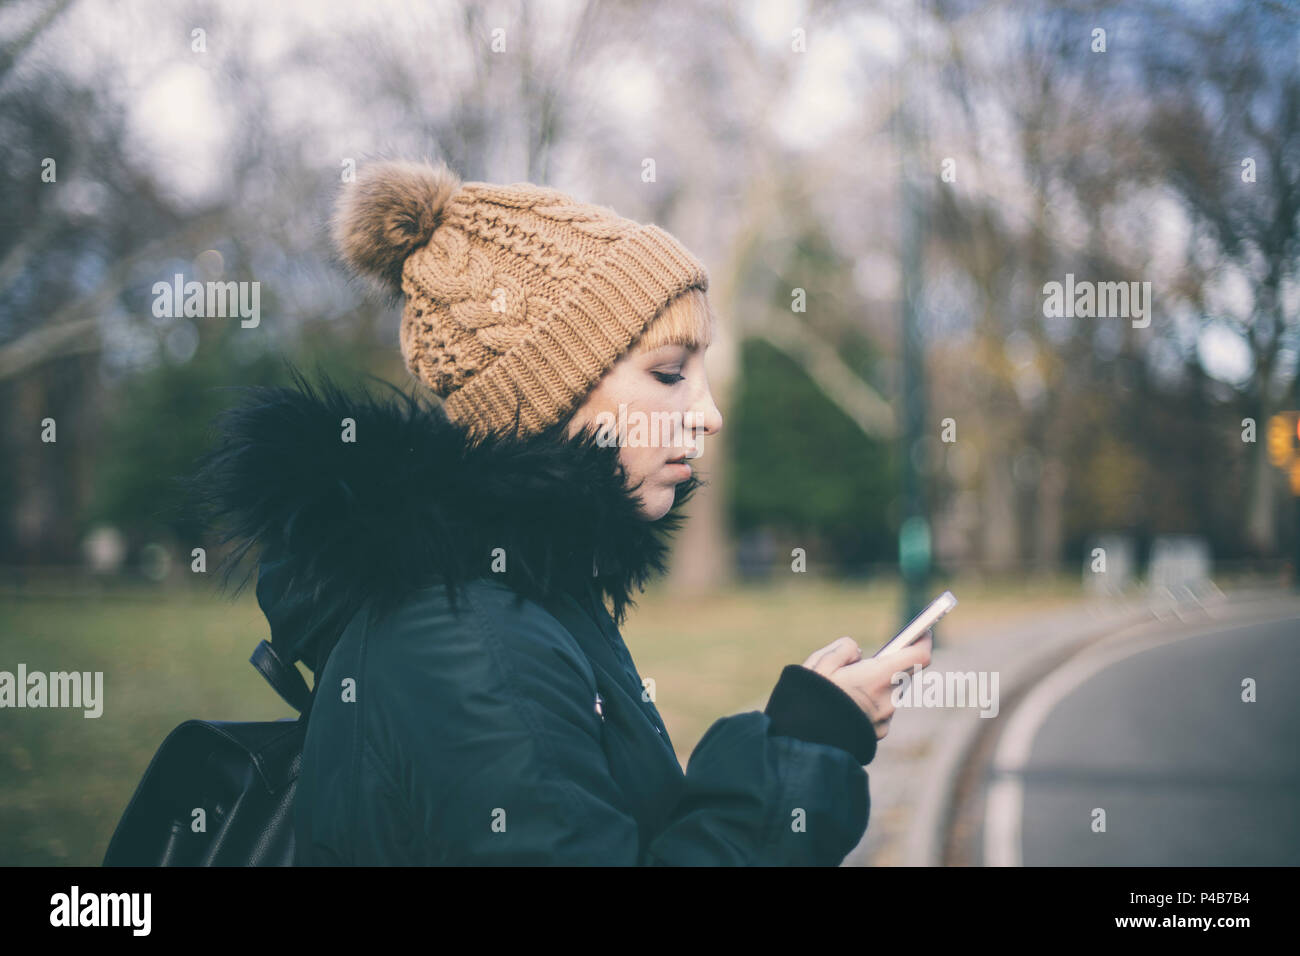 woman looking to her cell phone in central park on winter Stock Photo